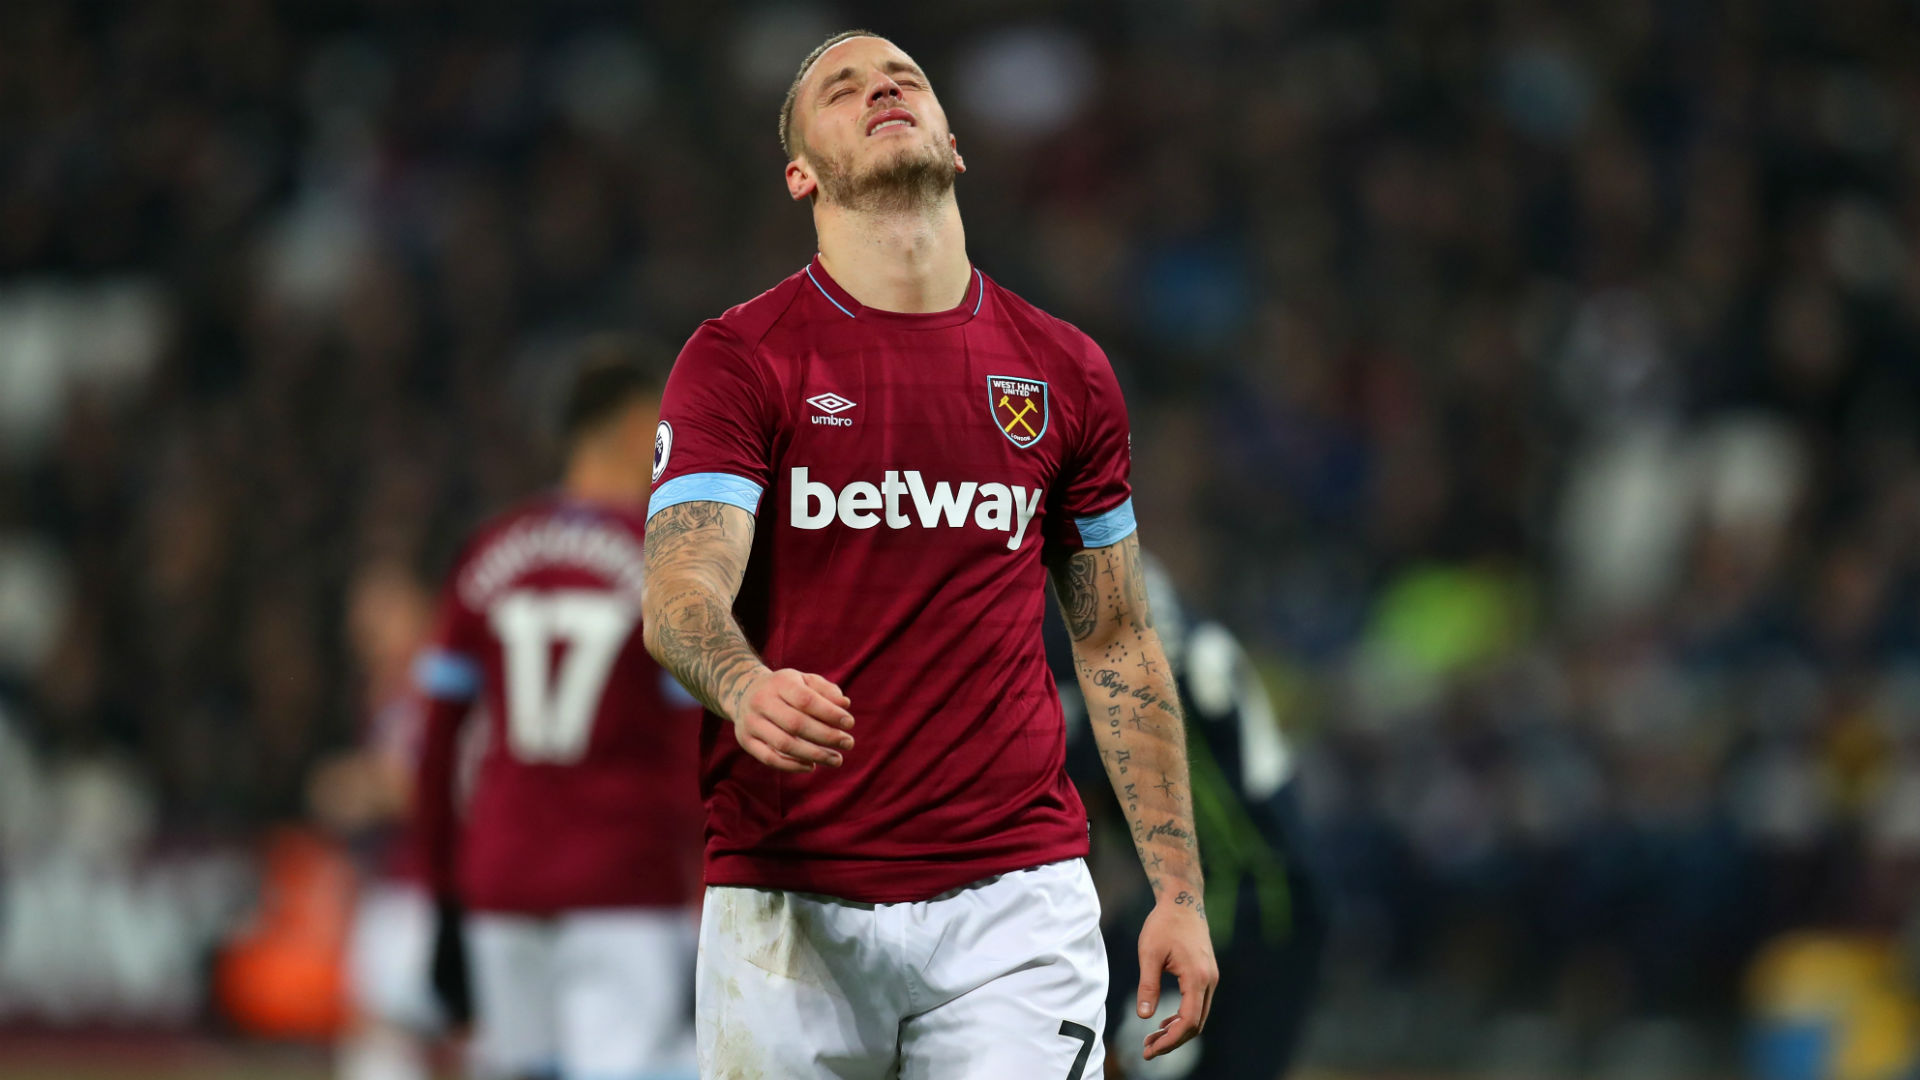 West Ham are set to be without Marko Arnautovic for up to a month after he sustained a muscle injury against Cardiff City on Tuesday.